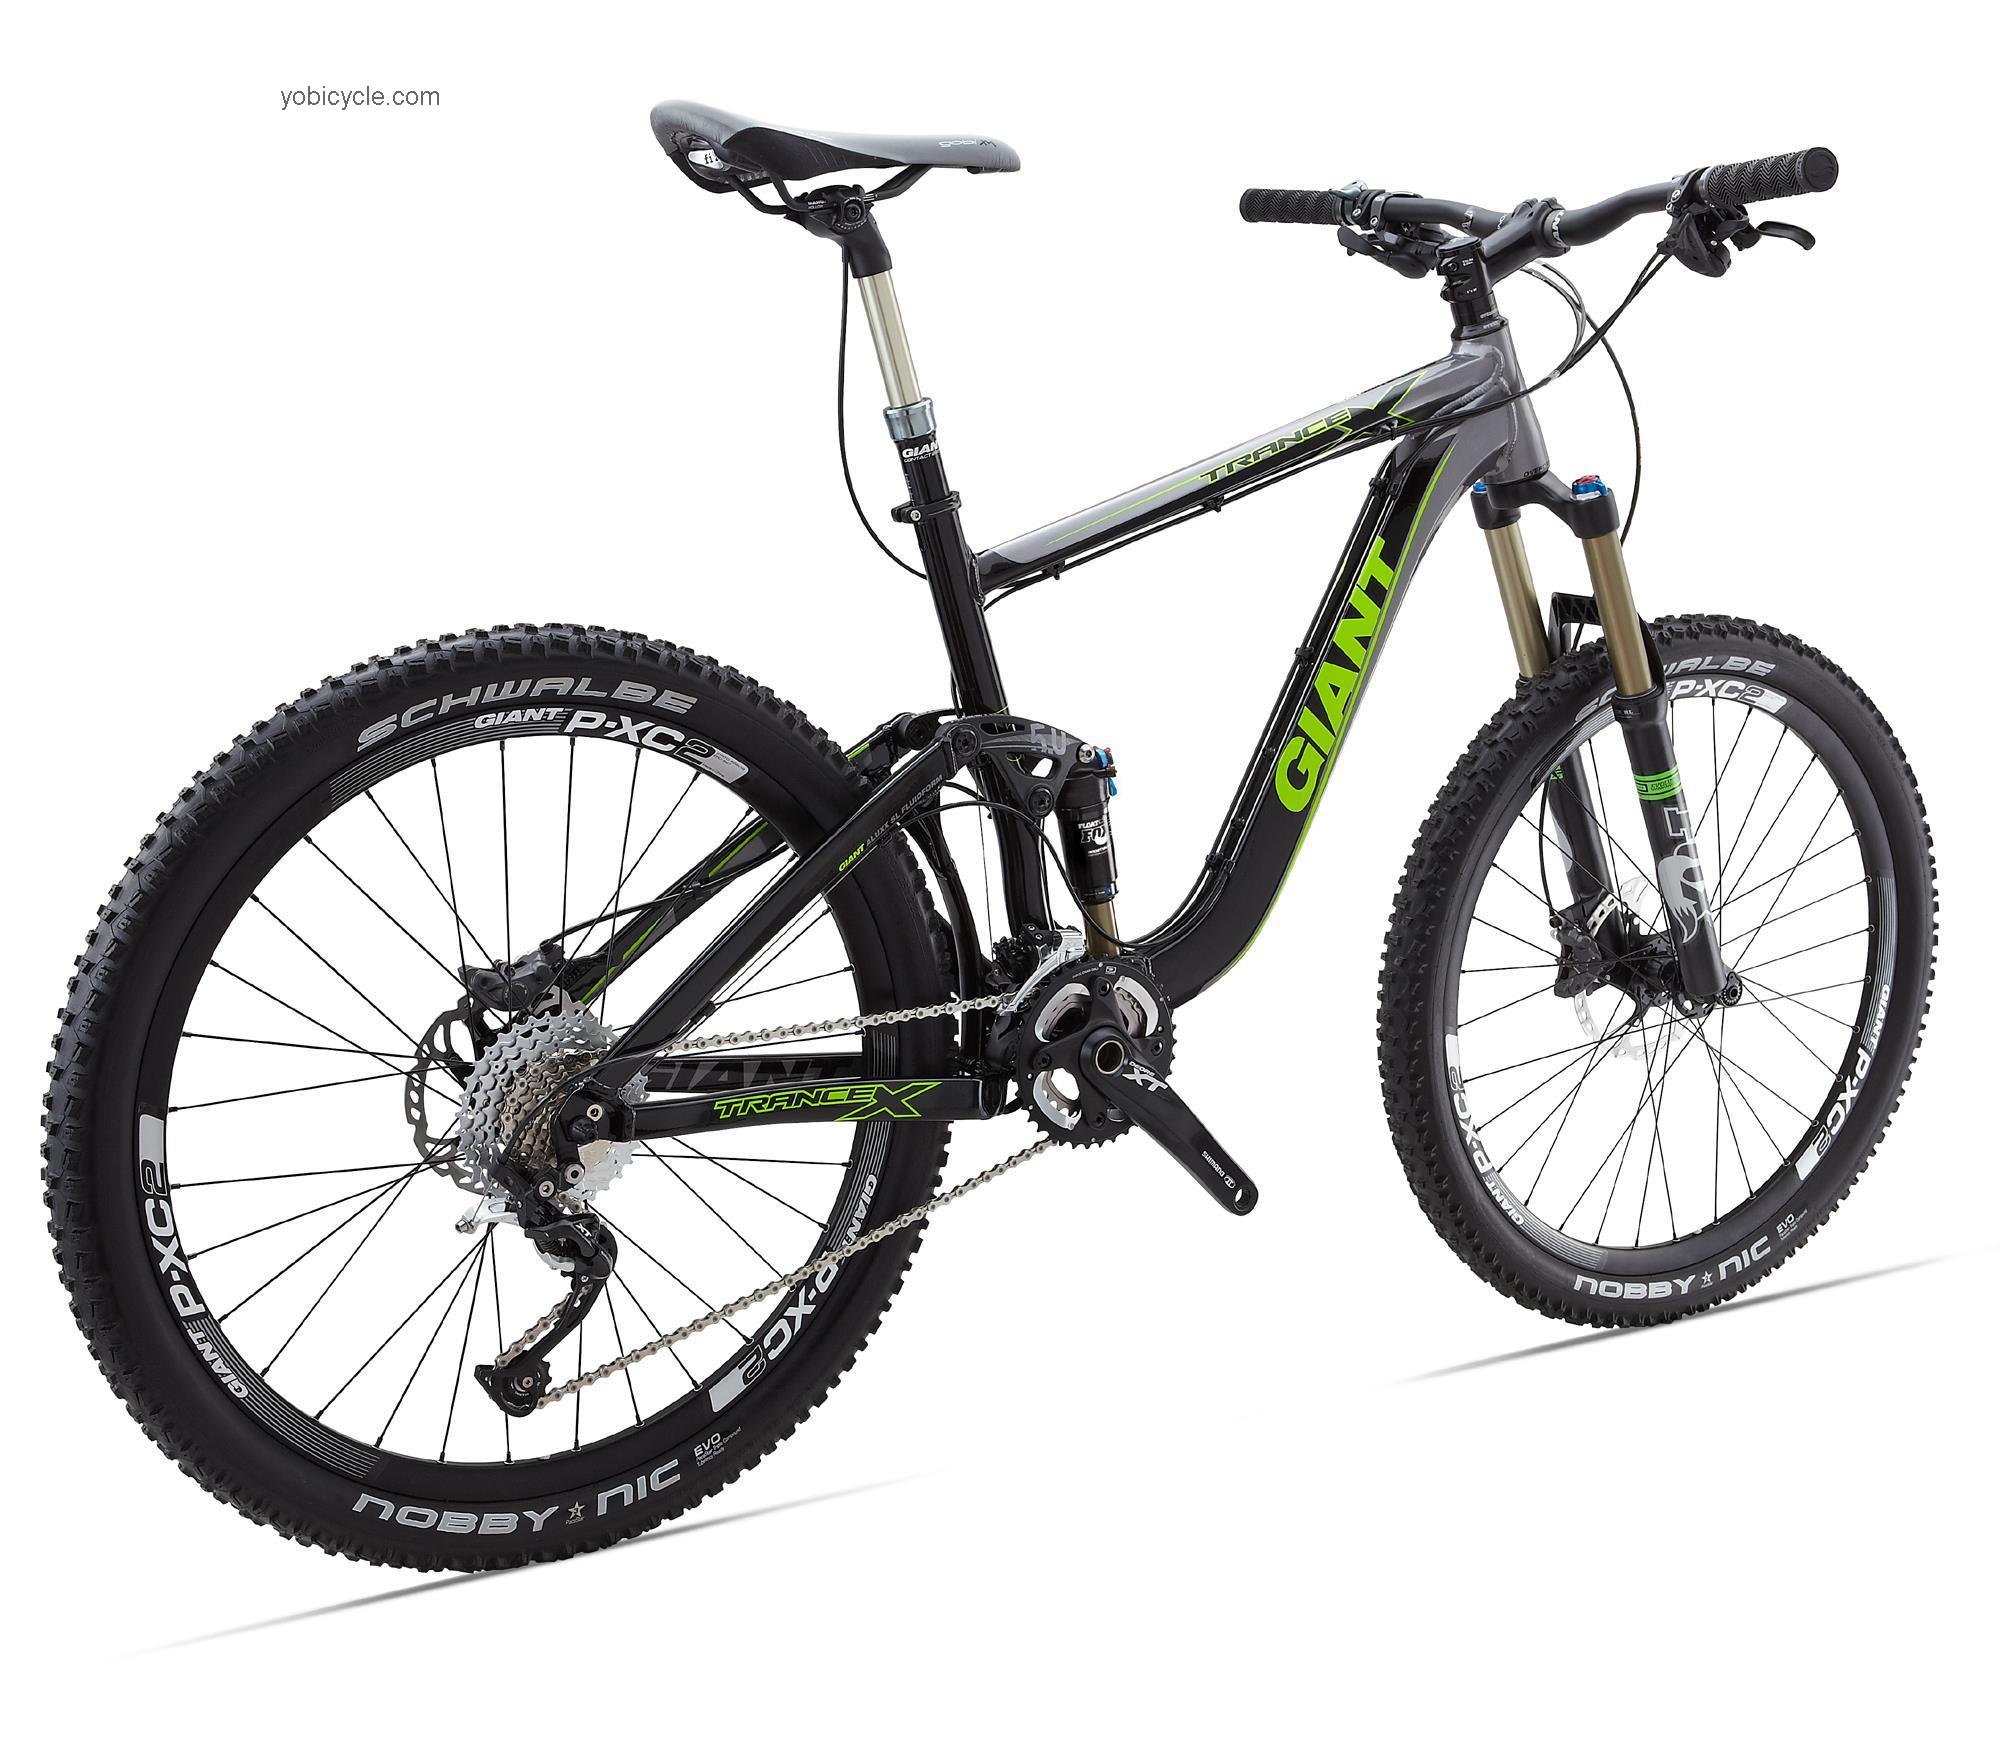 Giant Trance X1 2013 comparison online with competitors